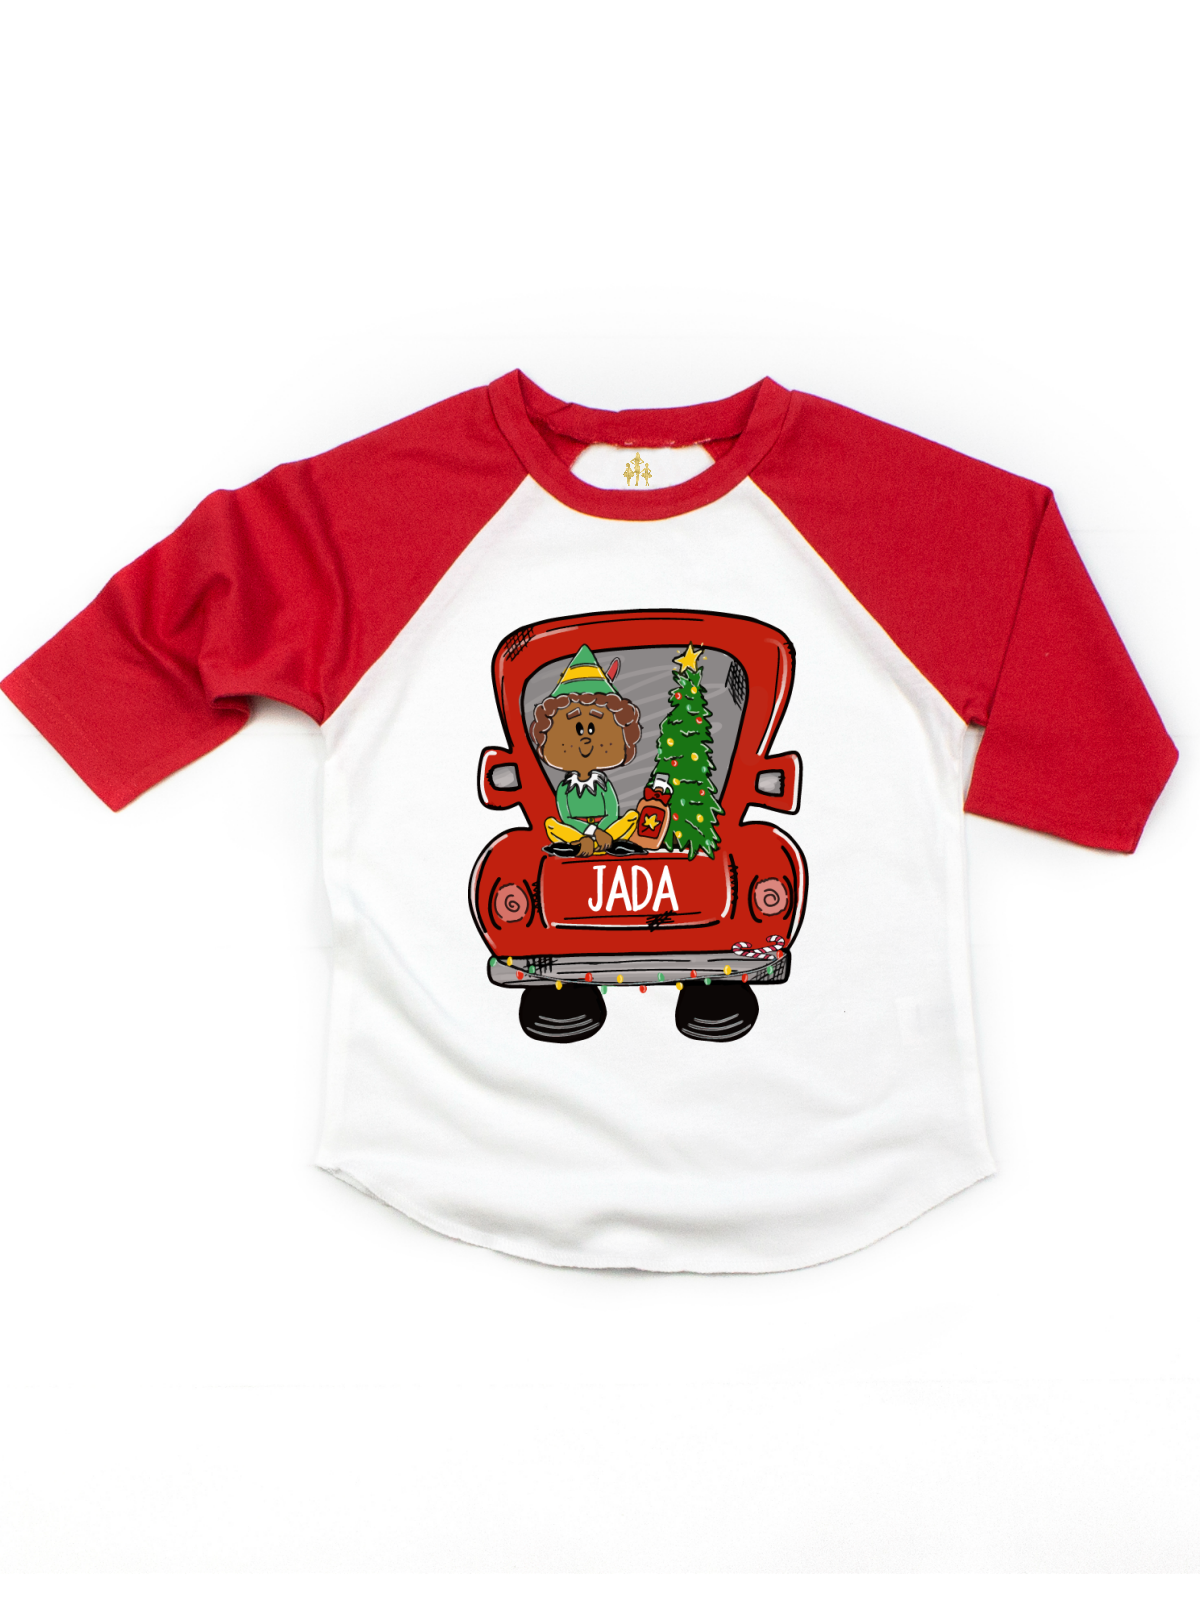 personalized funny kids holiday shirts